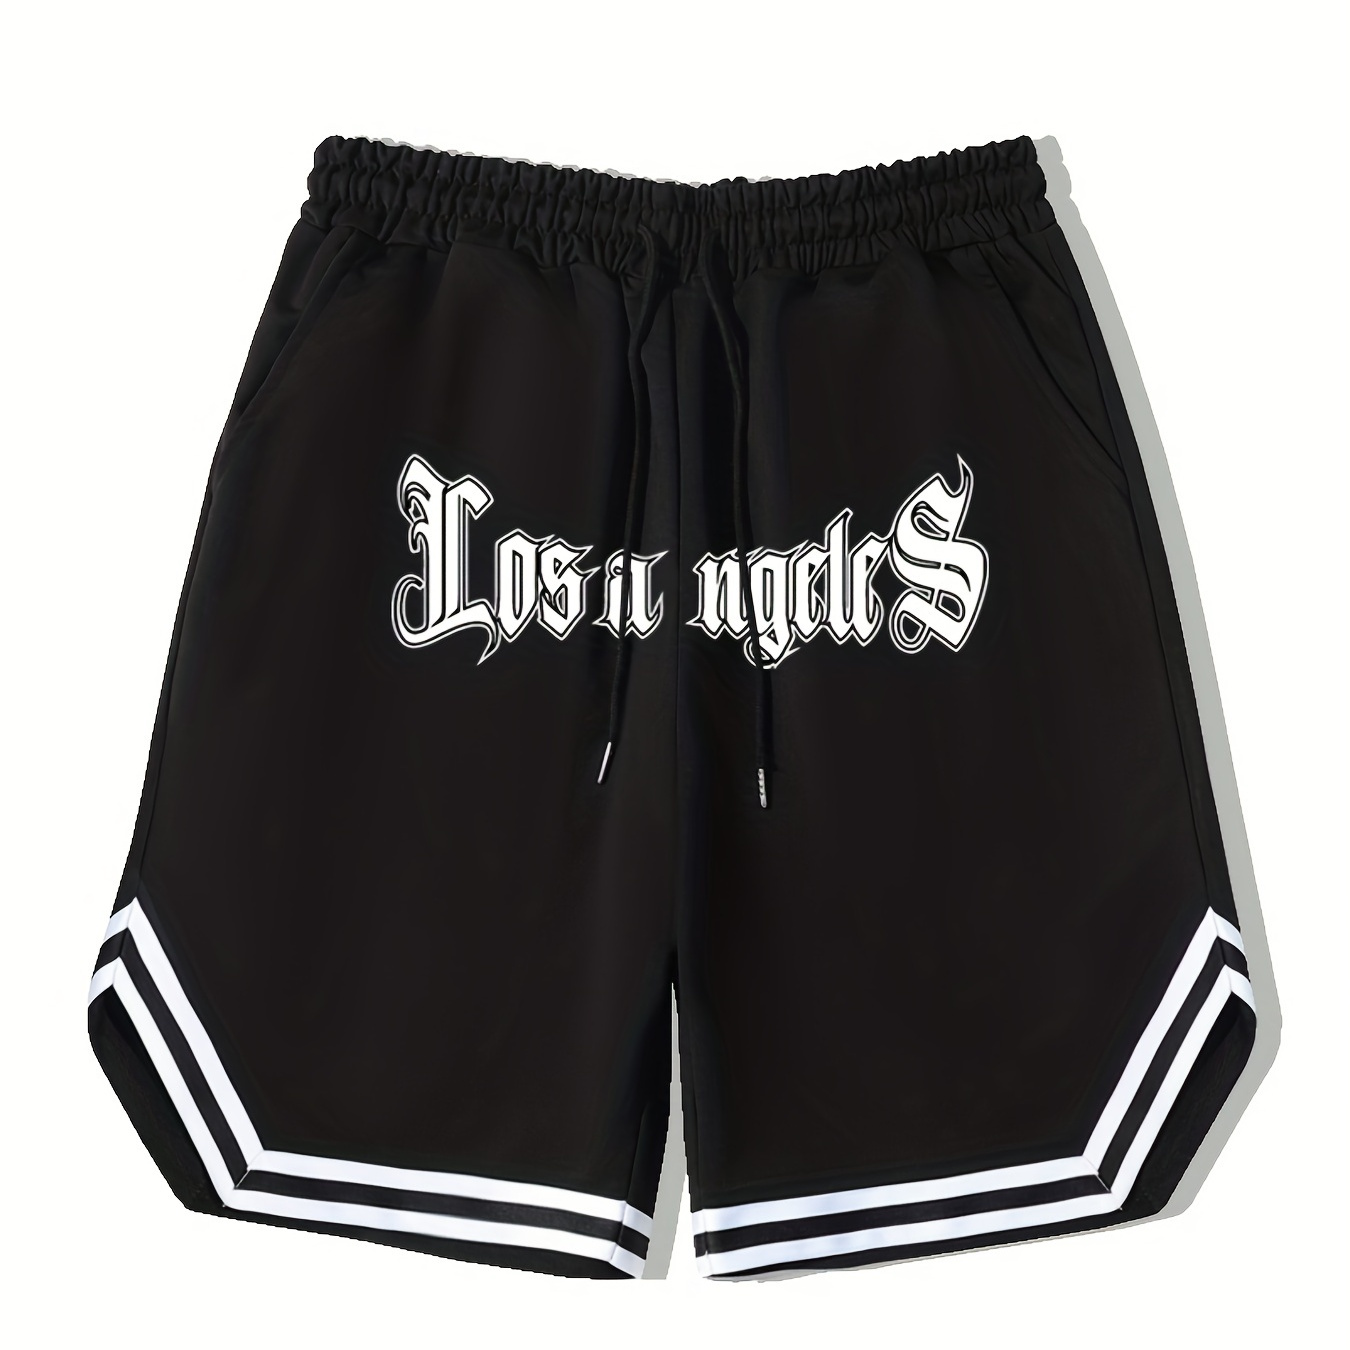 

Men's Los Angeles Print Basketball Shorts, Casual Slightly Stretch Drawstring Shorts For Workout Outdoor, Men's Clothing For Summer